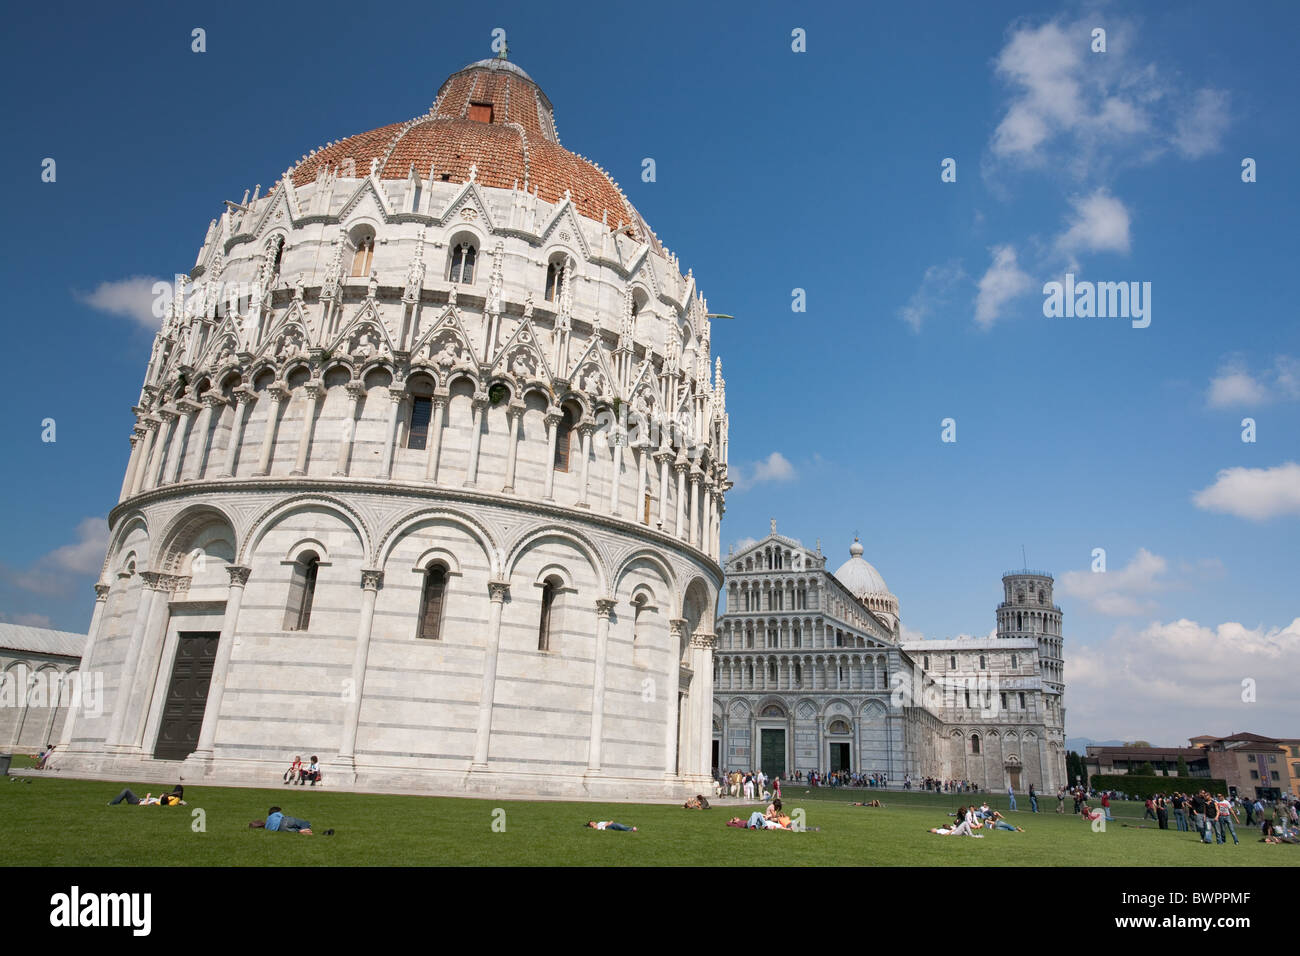 Facade decoration,Baptistry of St. John is a religious building from the Middle ages, in Pisa, Italy Stock Photo